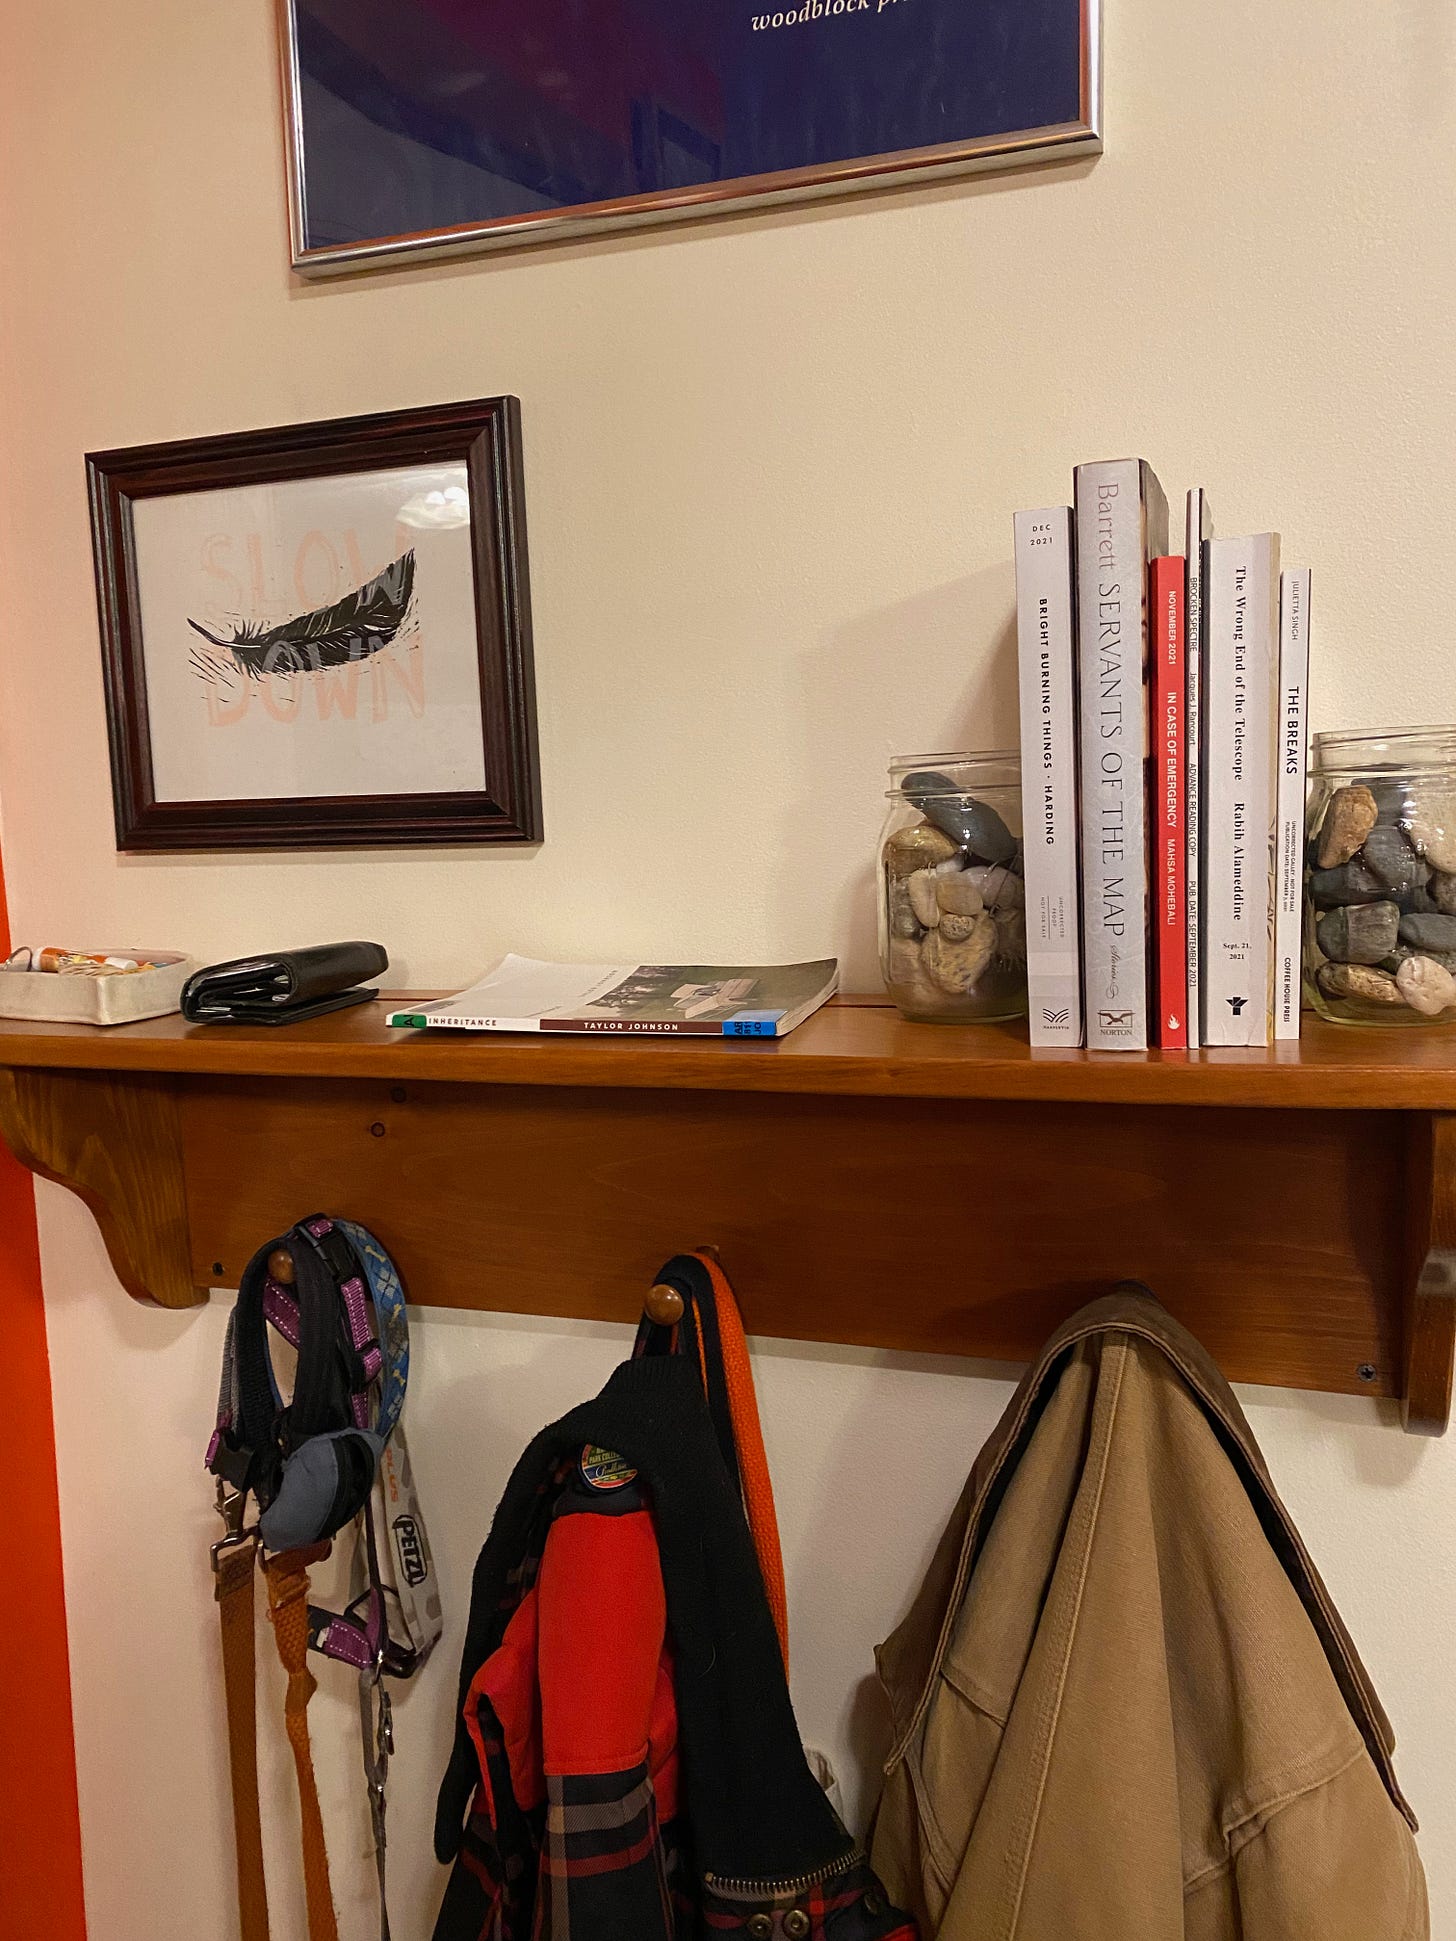 A wooden coat rack with three pegs and a shelf above is mounted on a white wall. The shelf holds a wallet, a library book on its side, and a stack of books held up with two glass jars full of rocks. A print of a feather hangs on the wall above the shelf, and several coats, vests, and dog leashes hang from the hooks.